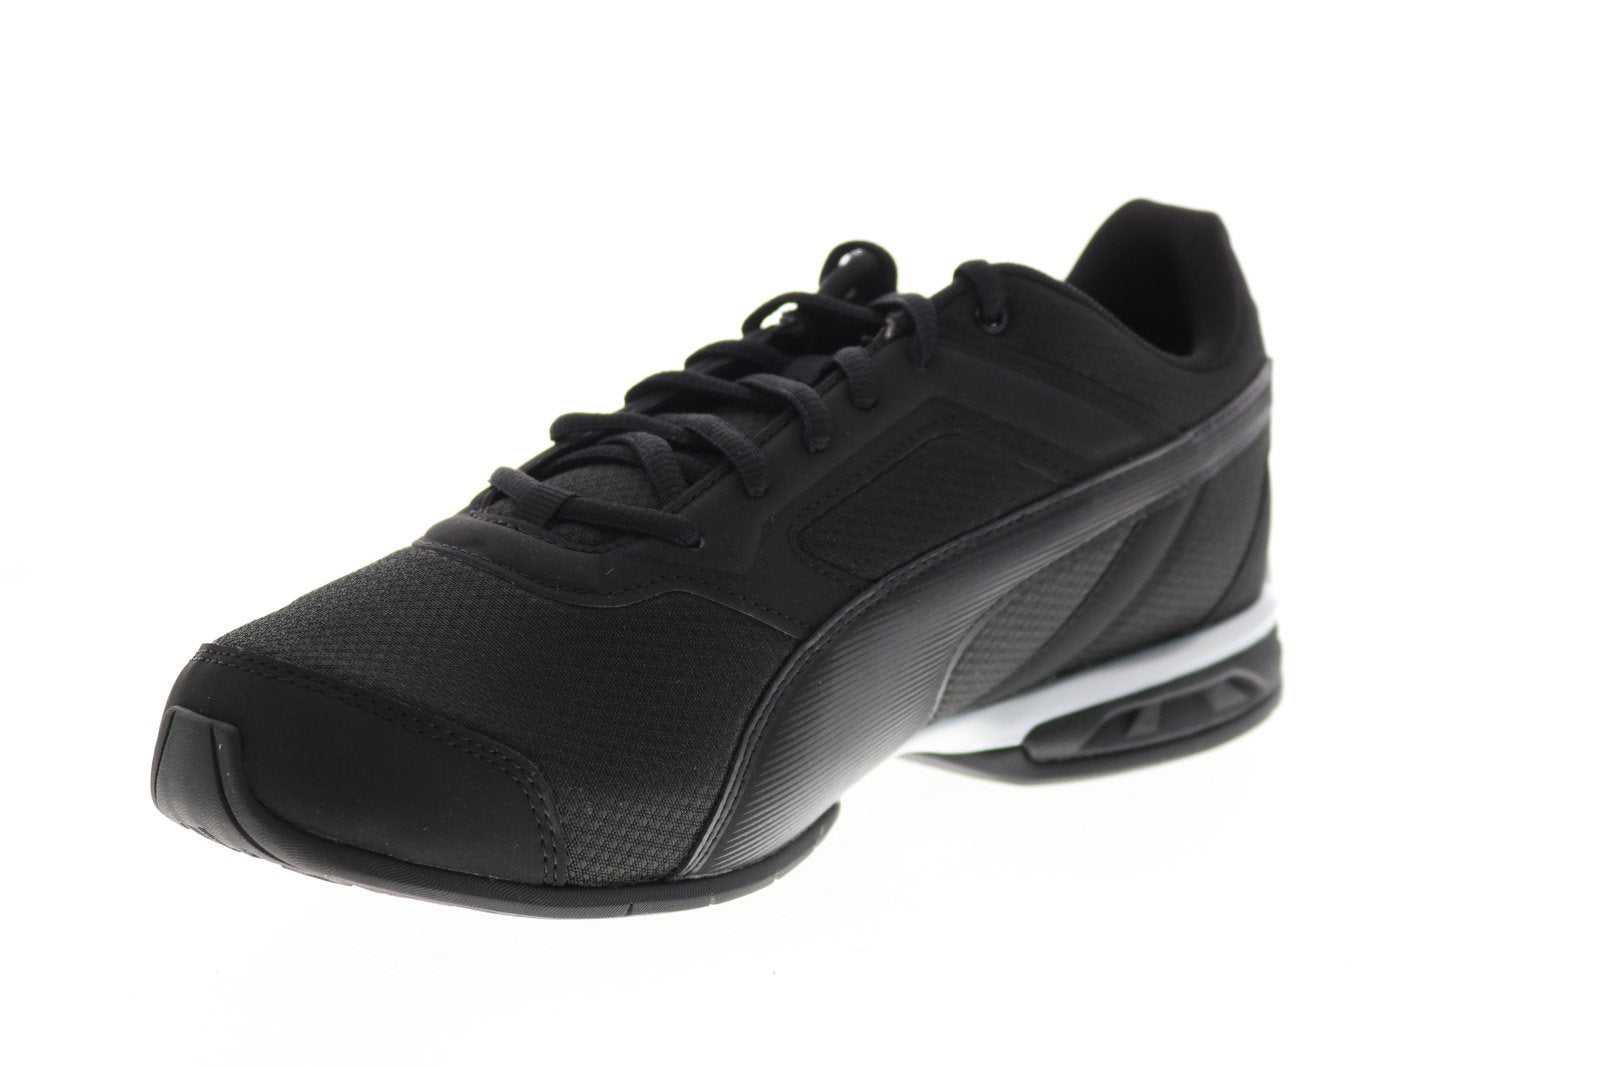 Puma Tazon 7 19520802 Mens Black Leather Lifestyle Sneakers Shoes ...